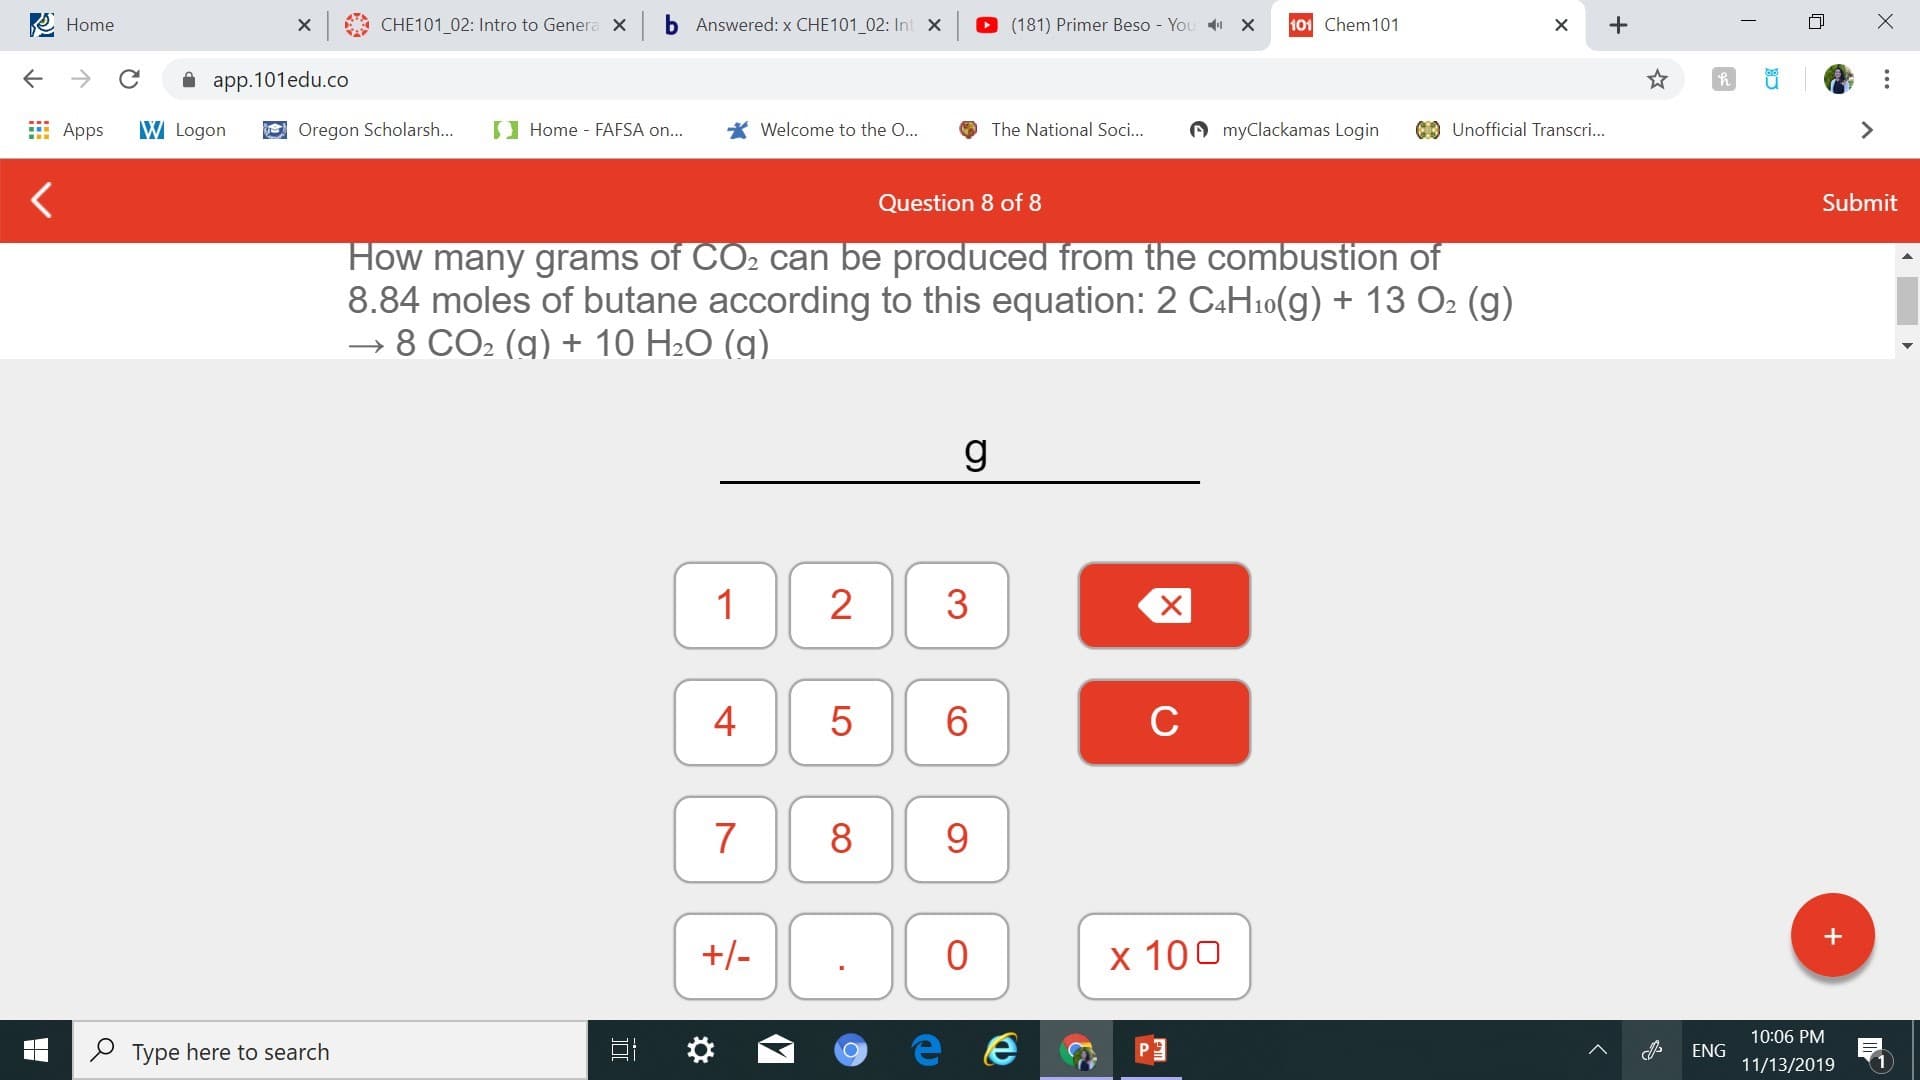 Home
CHE101 02: Intro to Genera X
b
Answered: x CHE101_02: Int X
(181) Primer Beso - You
101 Chem 101
х
X
app.101edu.co
myClackamas Login
CUnofficial Transcri...
W Logon
Oregon Scholarsh...
Home FAFSA on...
Welcome to the ...
The National Soci...
Apps
Submit
Question 8 of 8
How many grams of CO2 can be produced from the combustion of
8.84 moles of butane according to this equation: 2 CAH10(g)13 O2 (g)
8 CO2 (g) + 10 H2O (g)
g
1
2
6
с
7
8
+/-
0
x 100
10:06 PM
Type here to search
ENG
11/13/2019
X
+
LO
